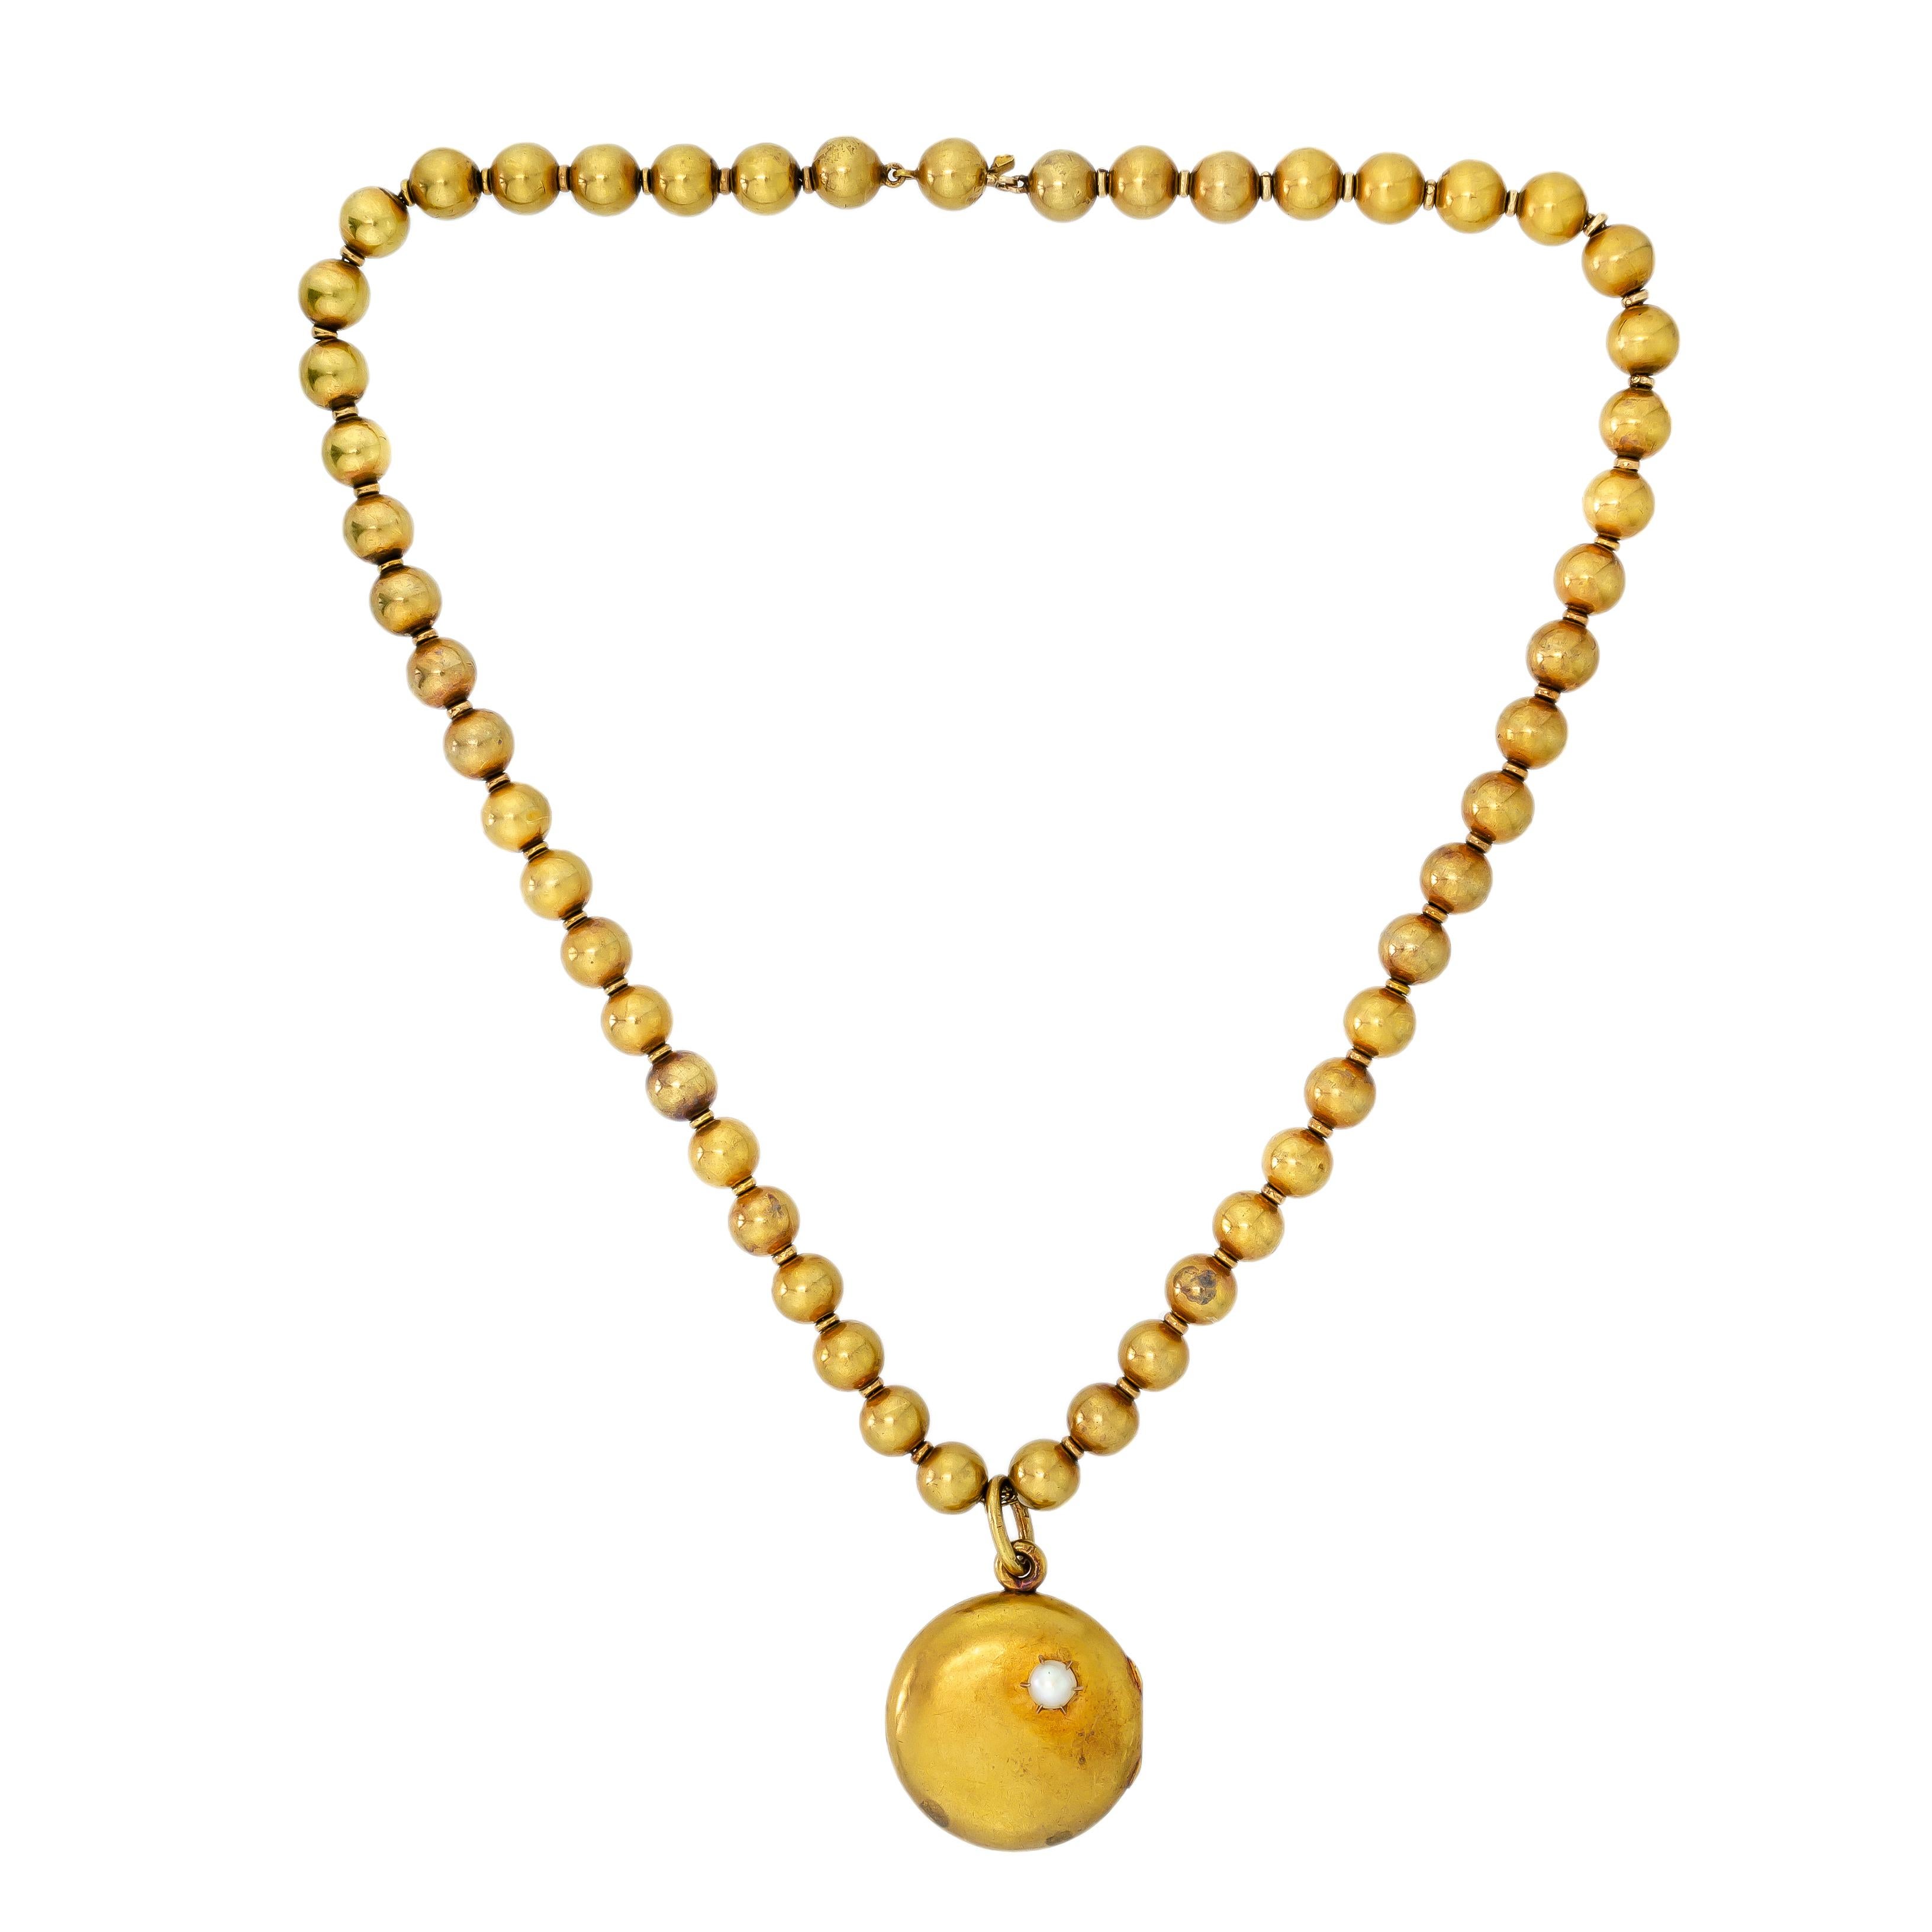 Stunning Antique 18Kt yellow gold ball and locket necklace - 16